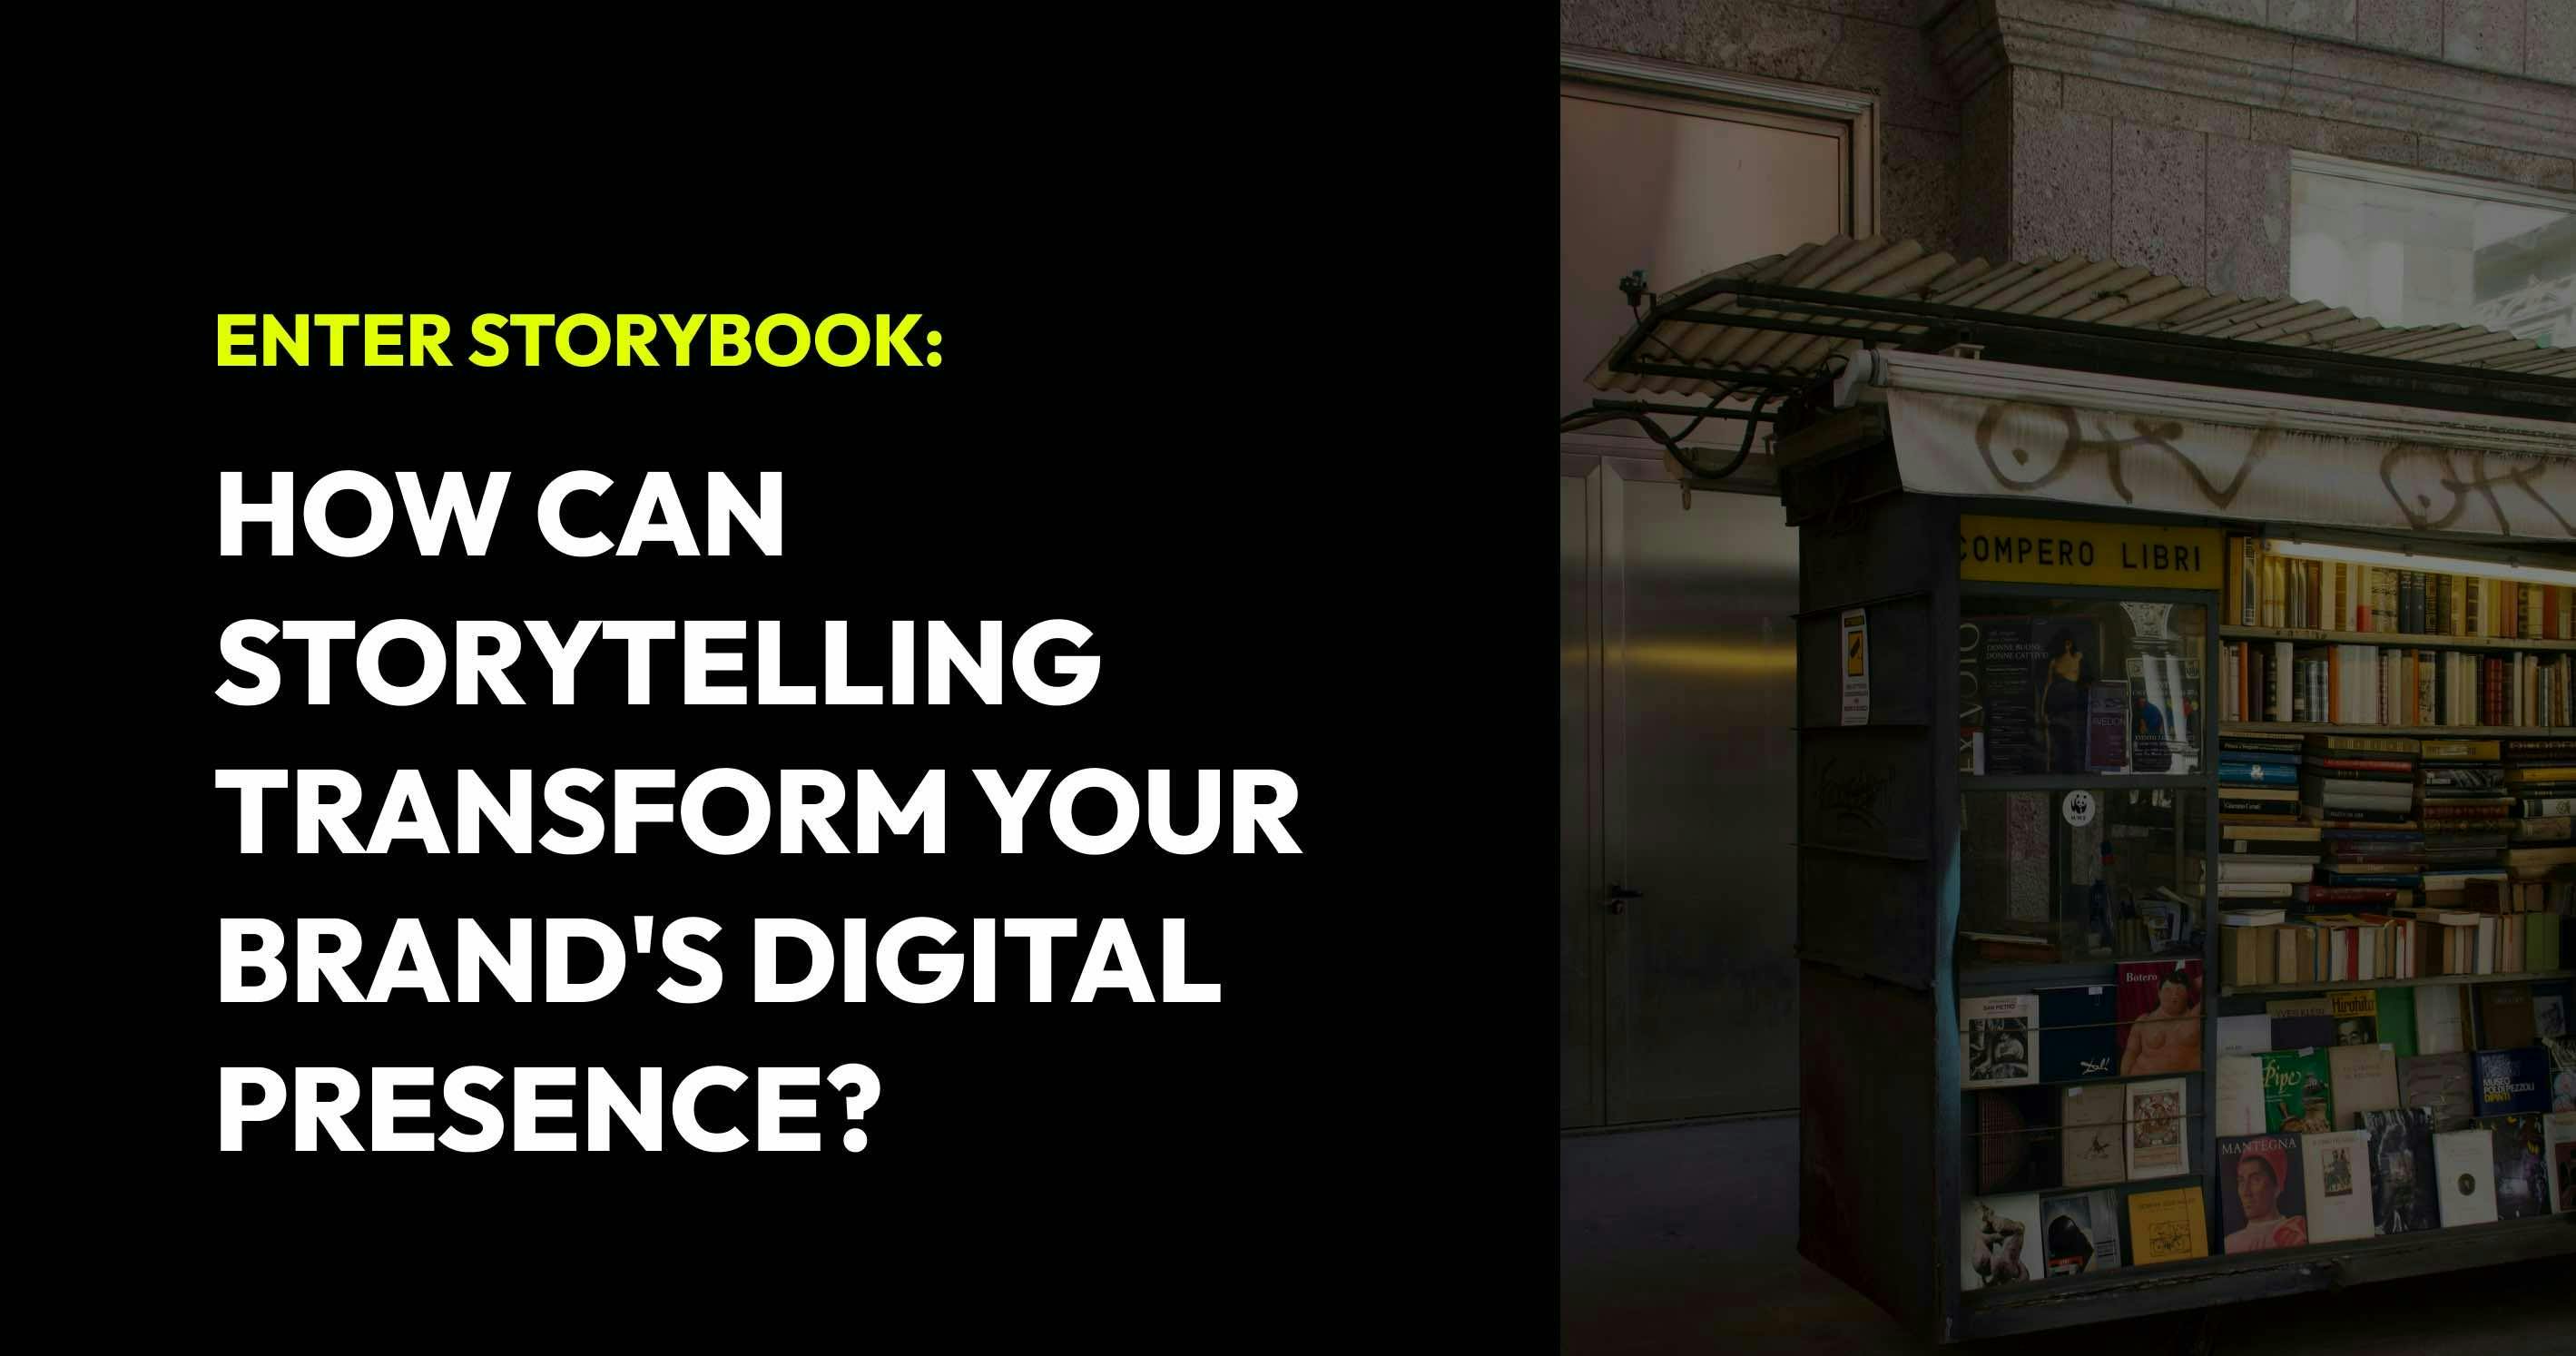 An image for a blog post titled Enter Storybook: How Can Storytelling Transform Your Brand's Digital Presence?